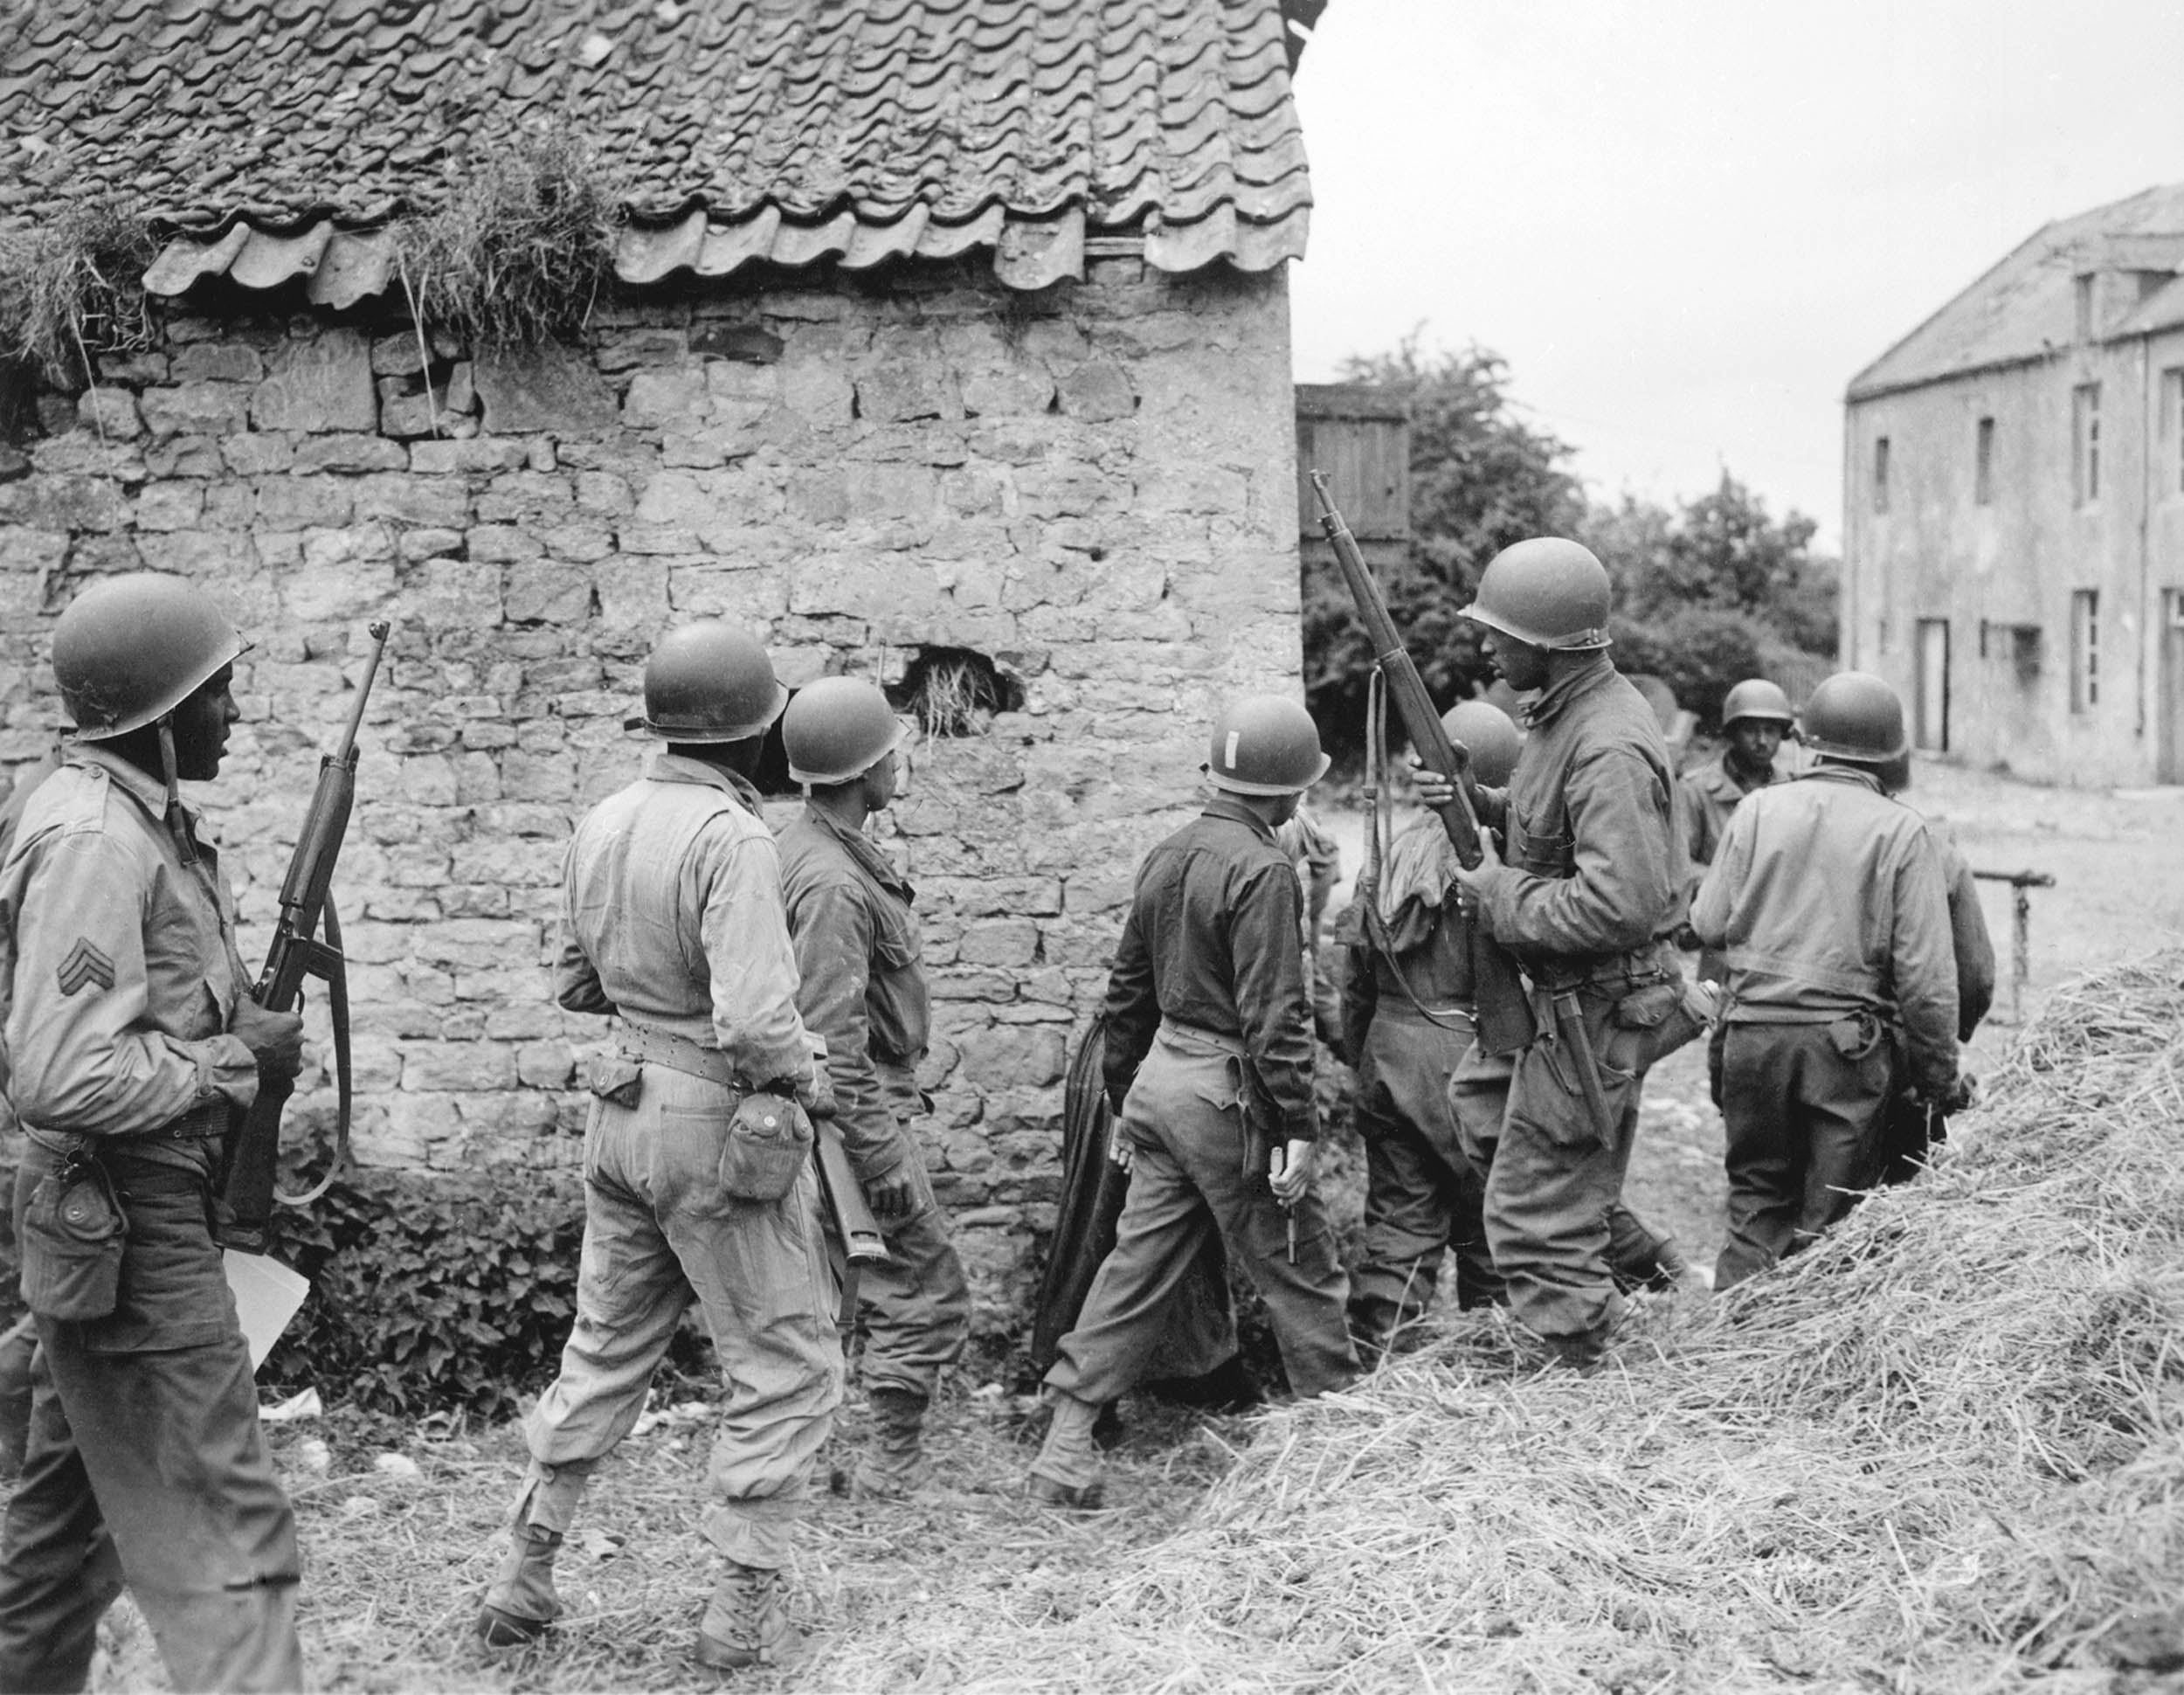 Soldiers surround farmhouse as they prepare to eliminate German sniper, near Vierville-sur-Mer, France, June 10, 1944 (U.S. Army/National Archives and Records Administration)